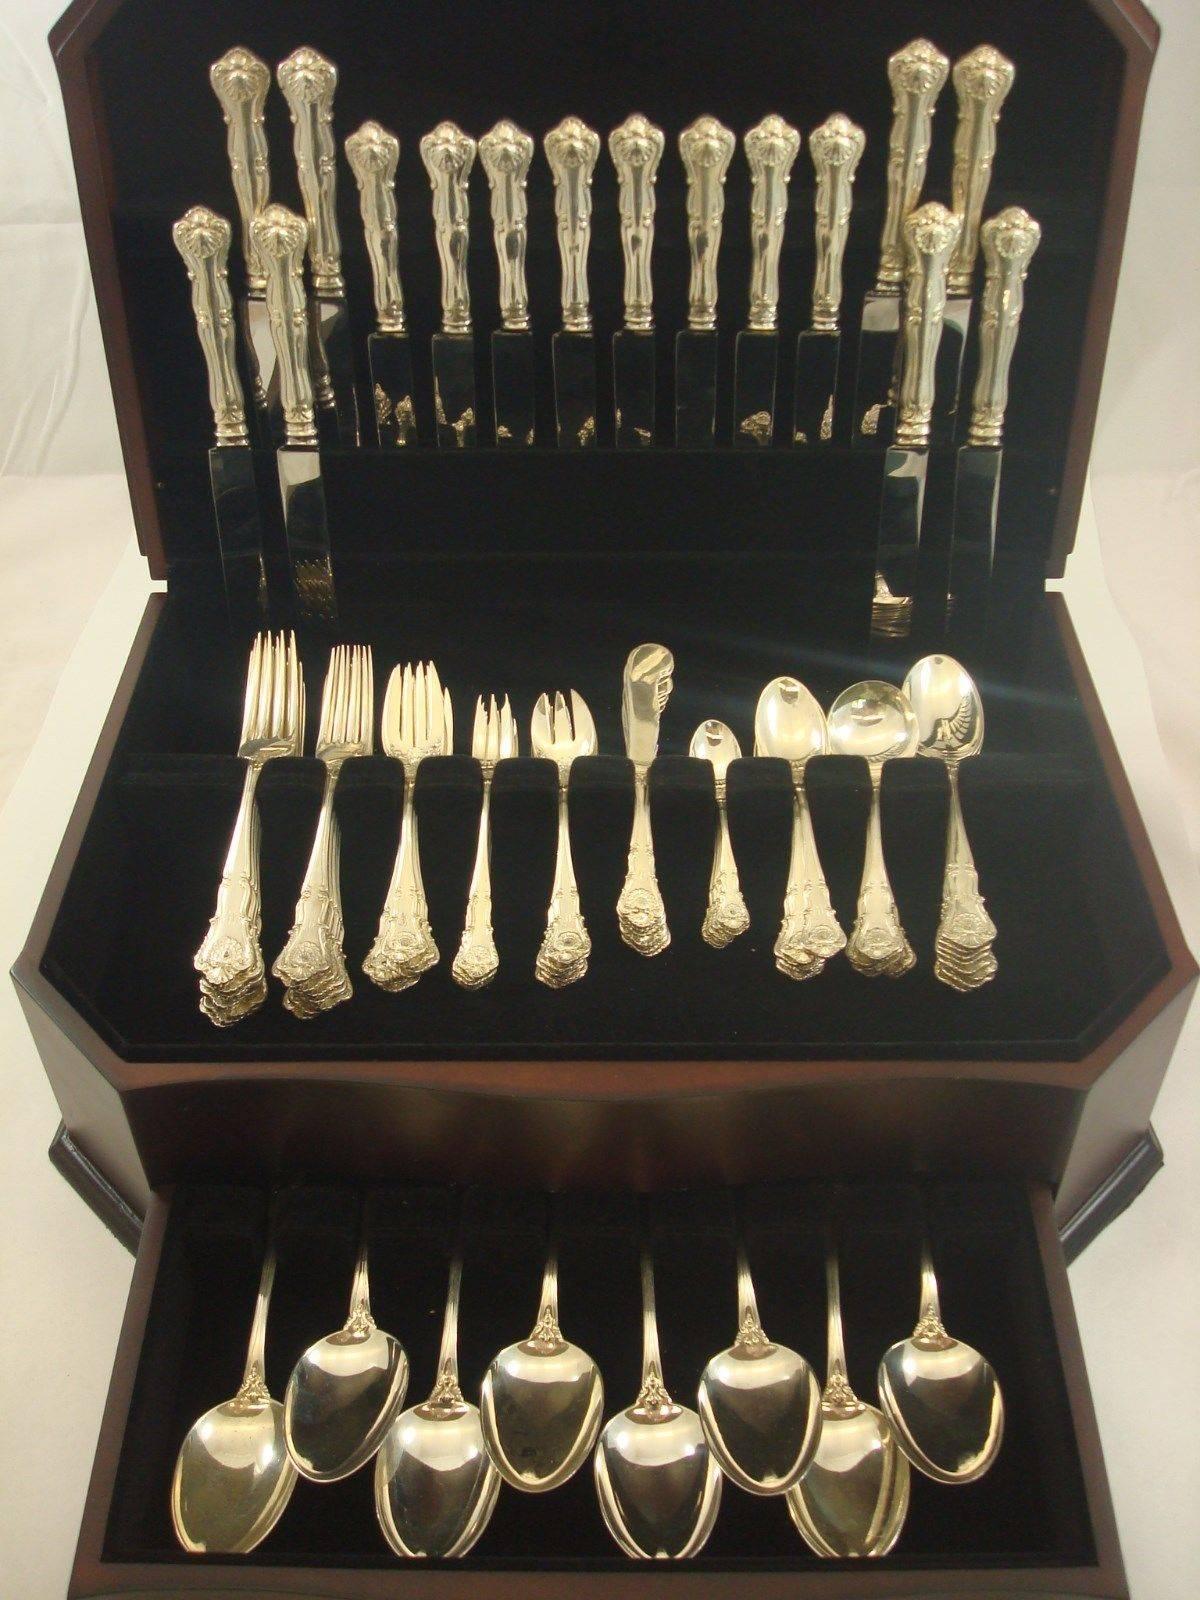 New Queens by Durgin sterling silver dinner and luncheon flatware set, 106 pieces, introduced in the year 1900. 

This set includes:

•8 Dinner size knives with blunt replaced stainless steel blades, 9 3/4